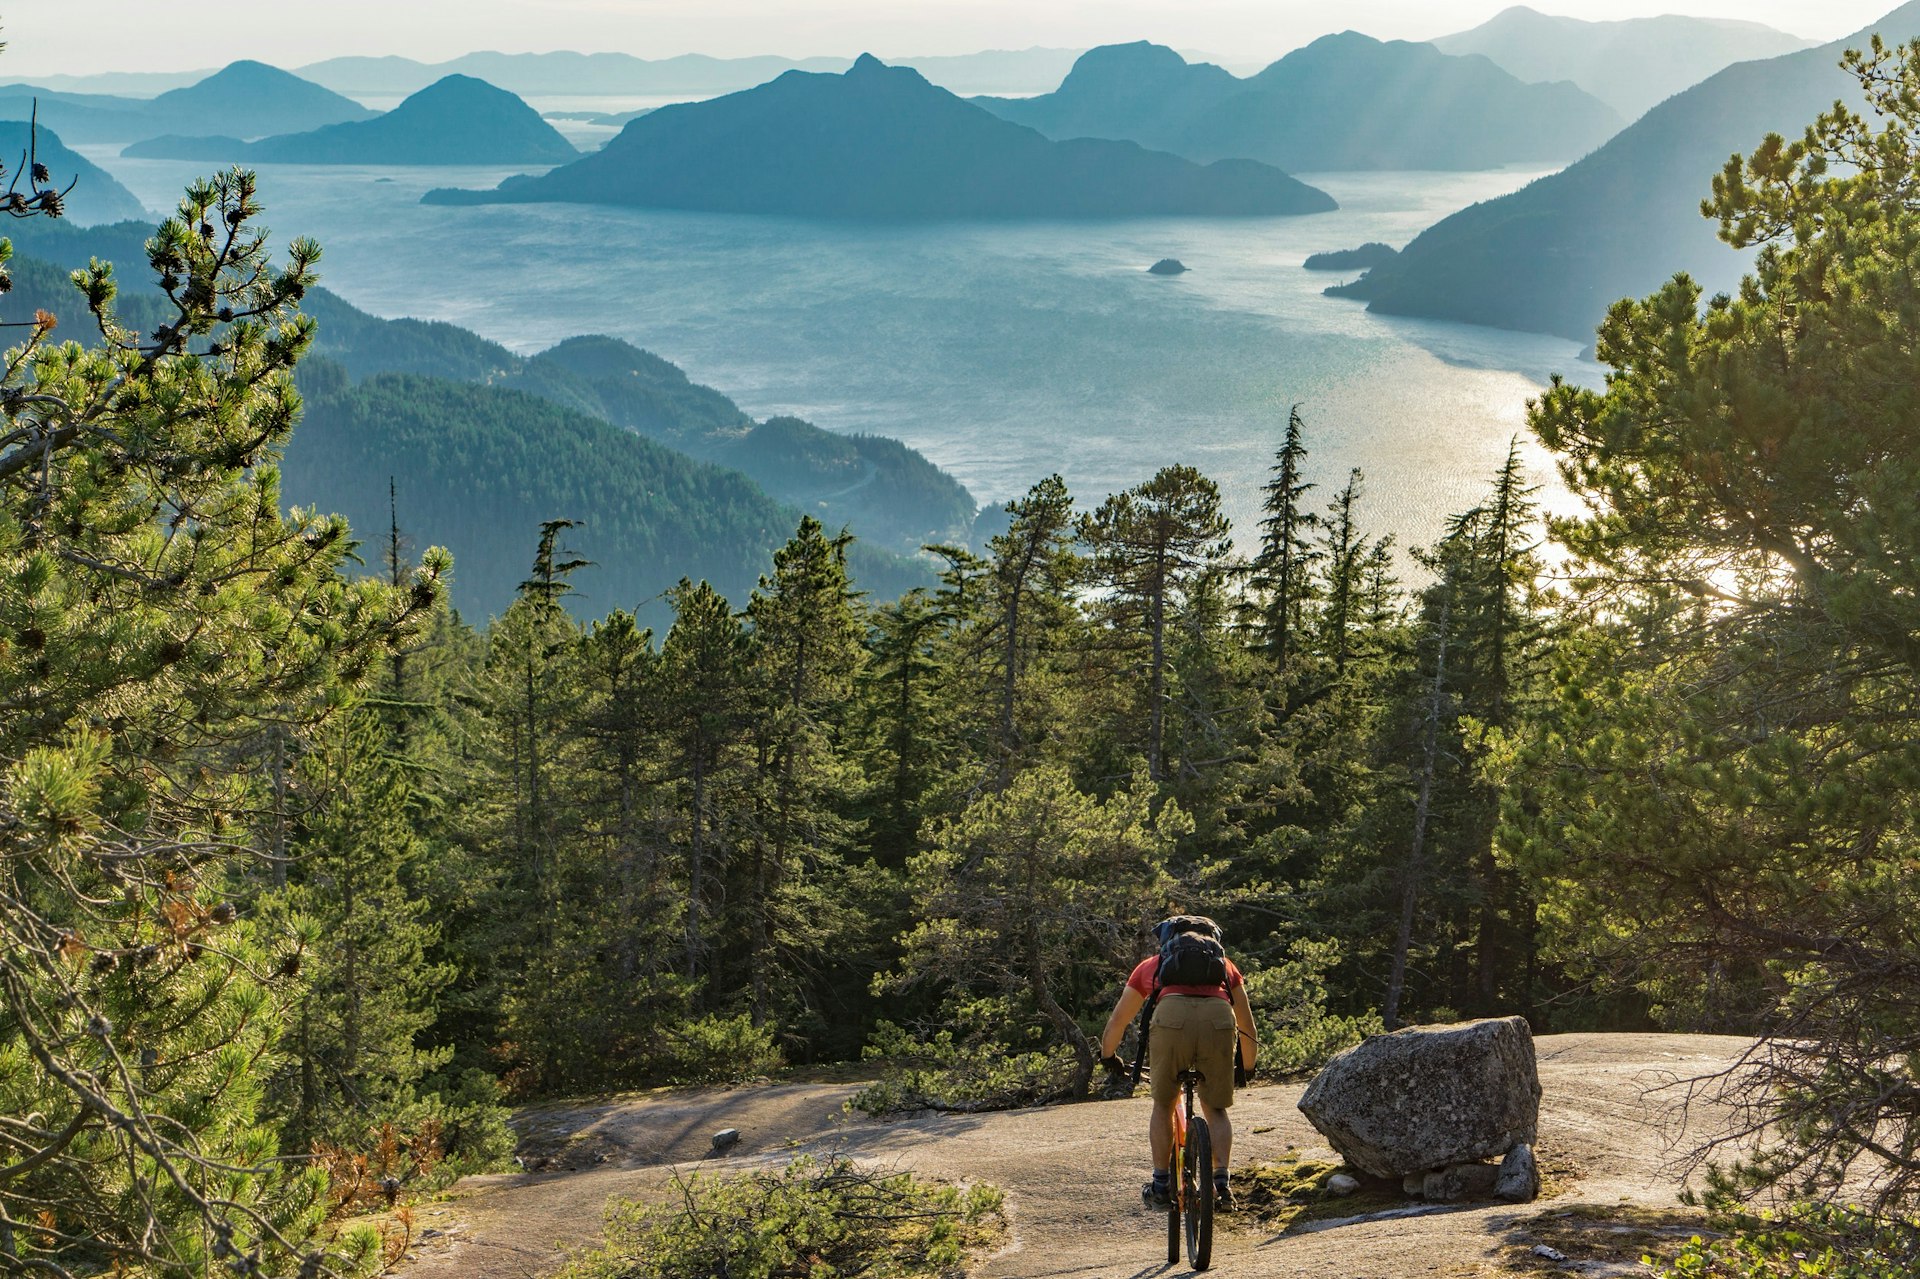 A mountain biker descends down a massive granite outcrop towards the forest below; in the distance far below is a spellbinding scene of forested islands jutting out of the ocean.